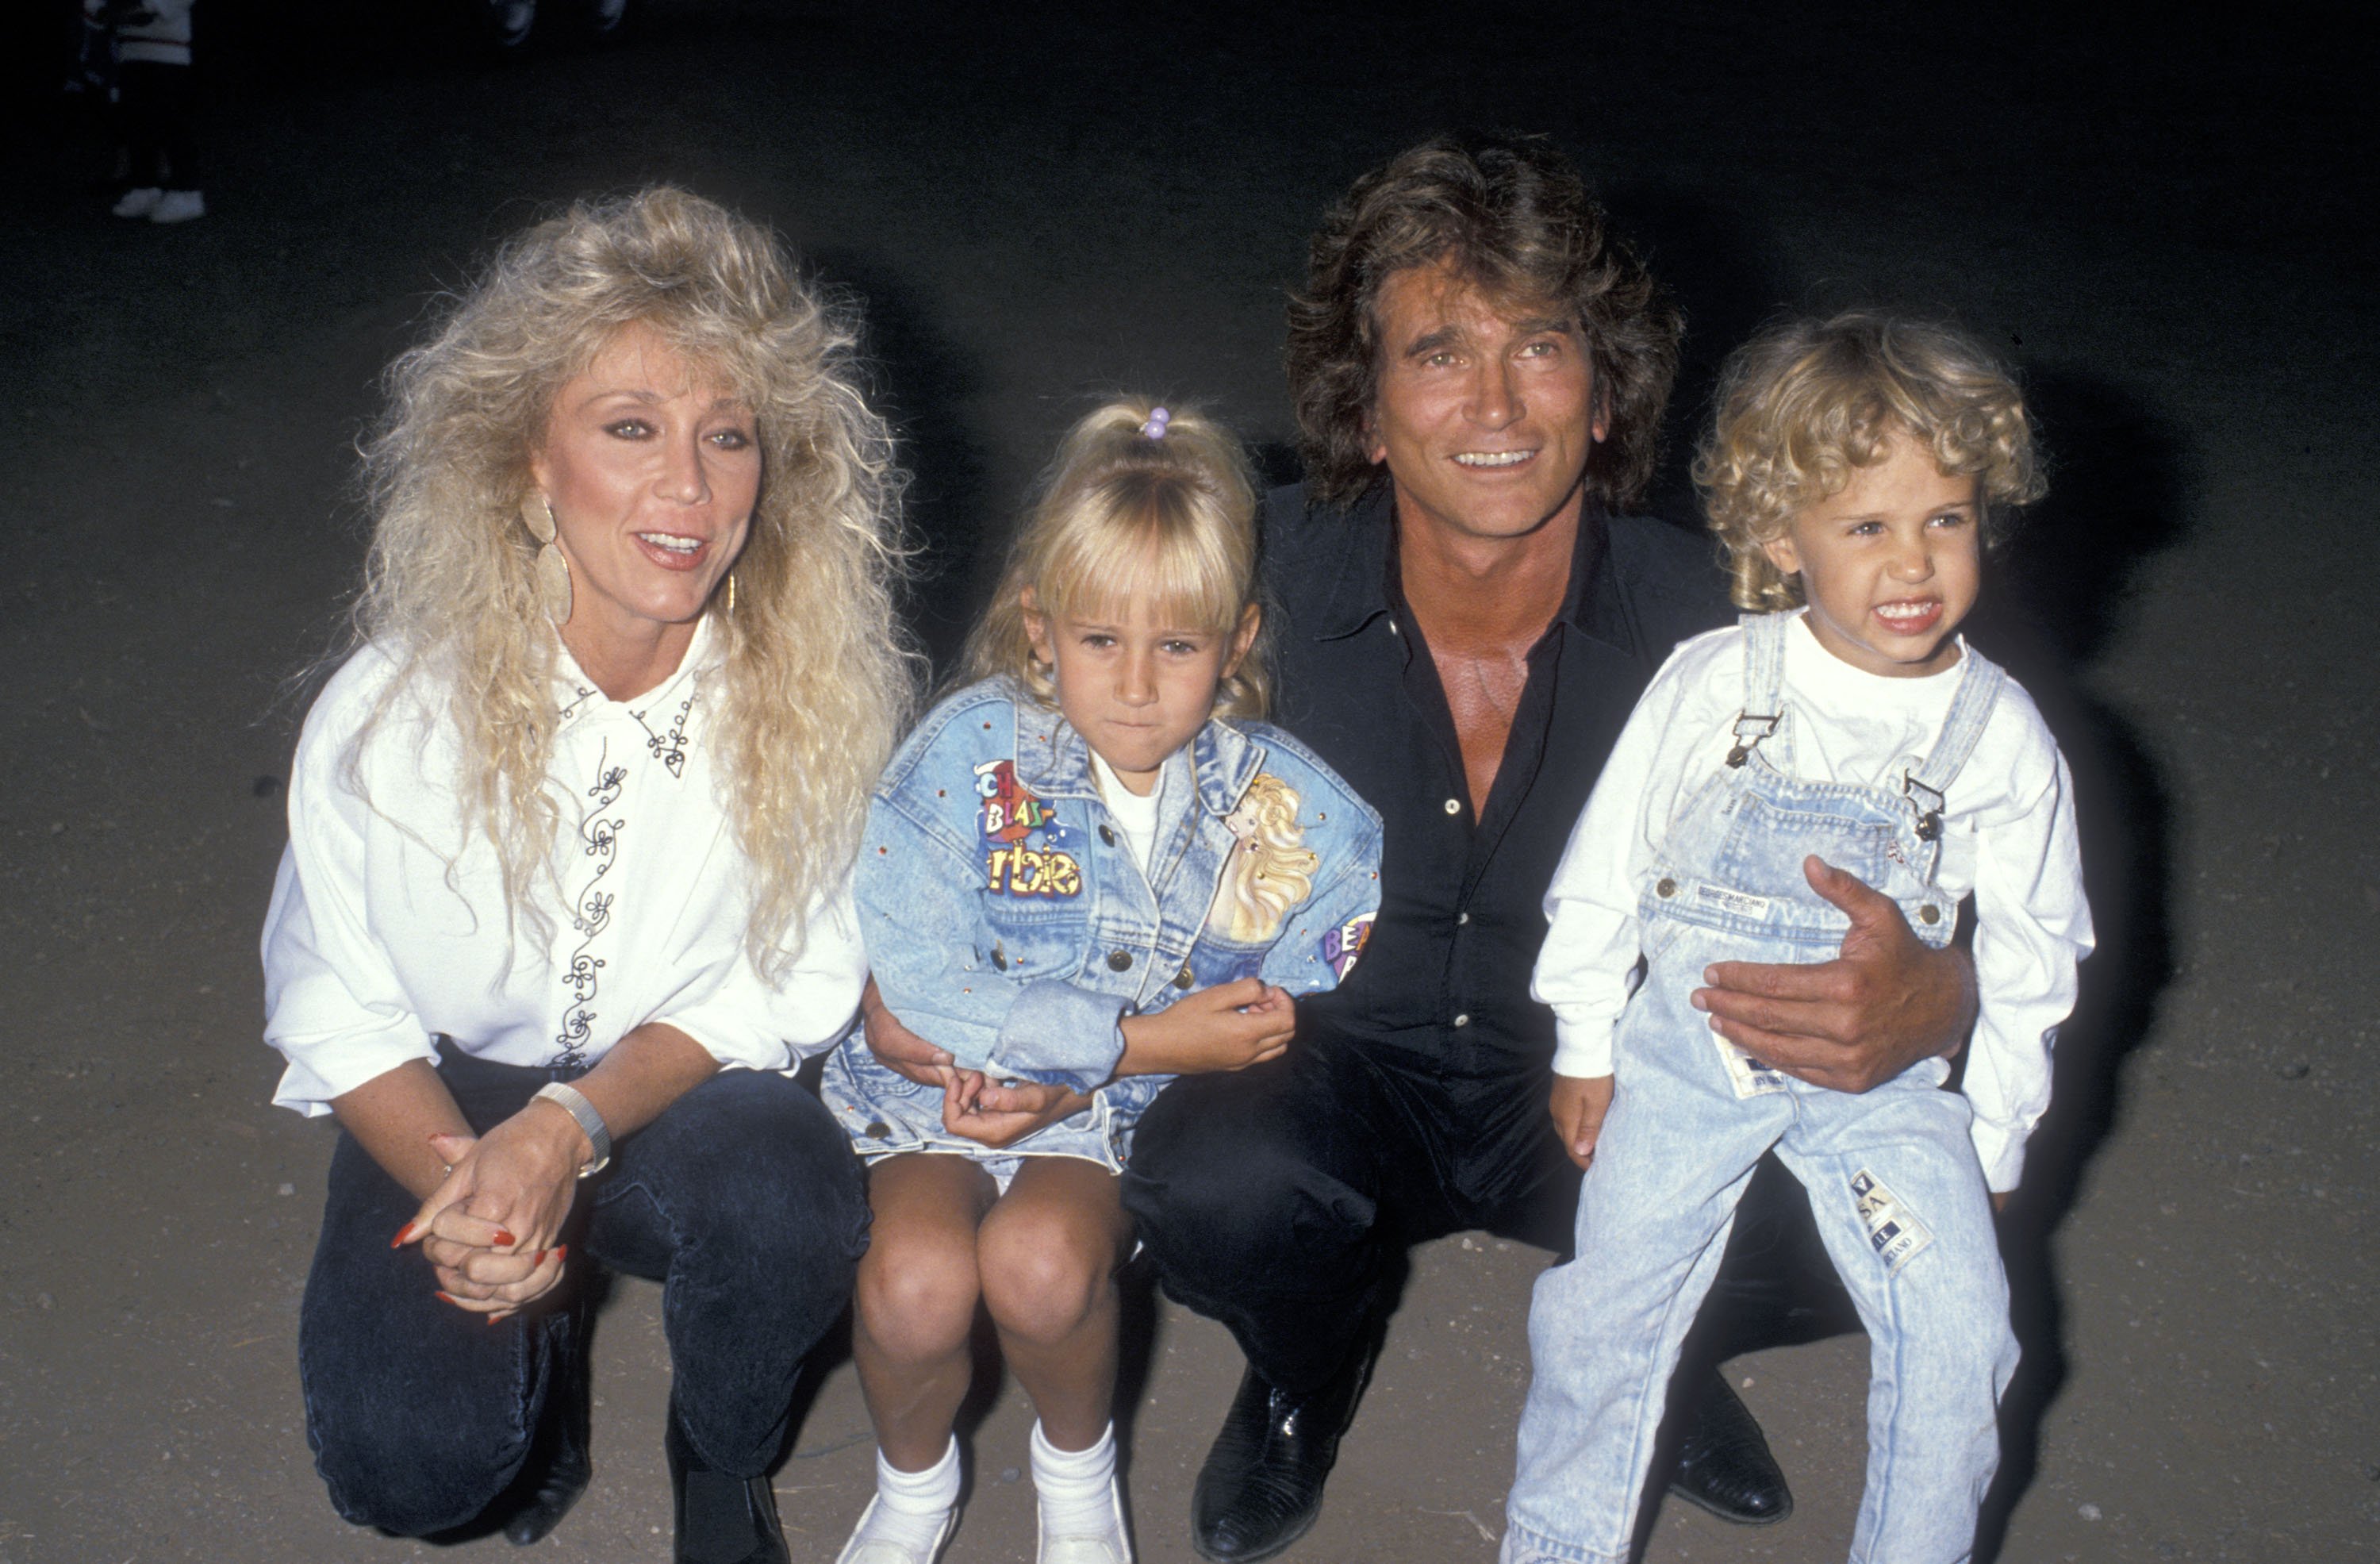 Michael Landon with his wife Cindy and their two kids